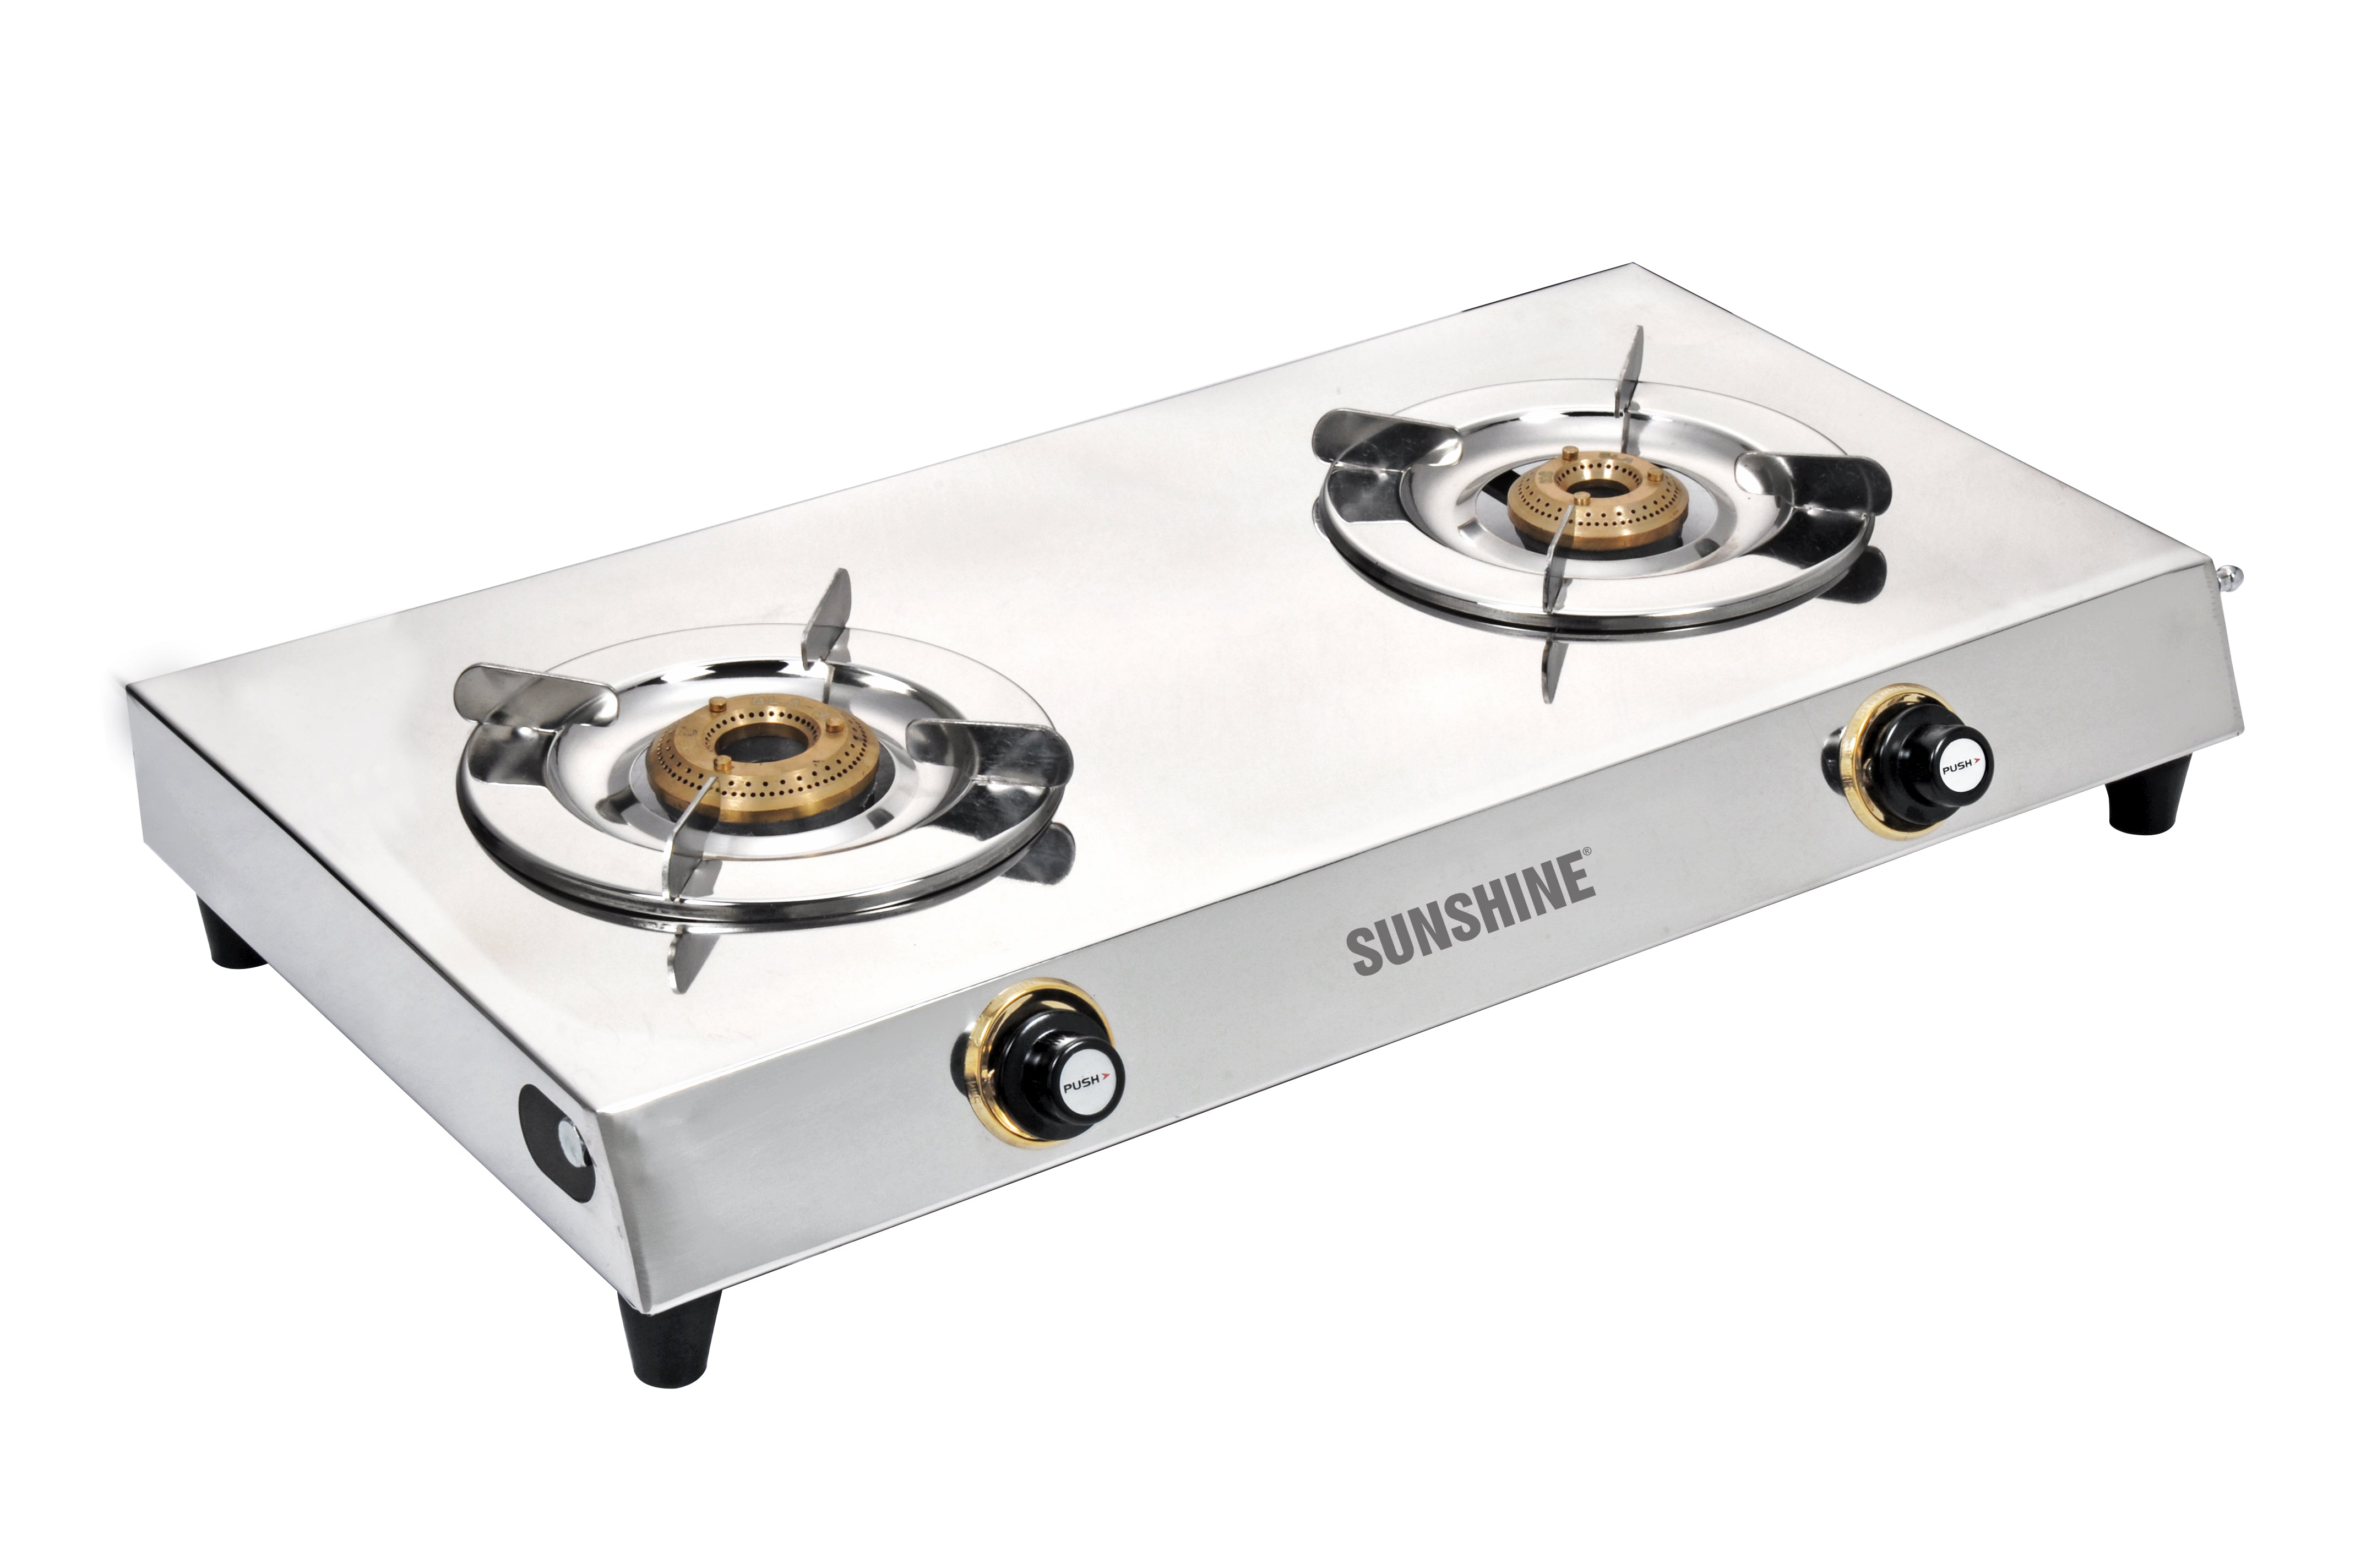 Stainless Steel Gas Range Cooktop stainless steel gas stove hover to zoom